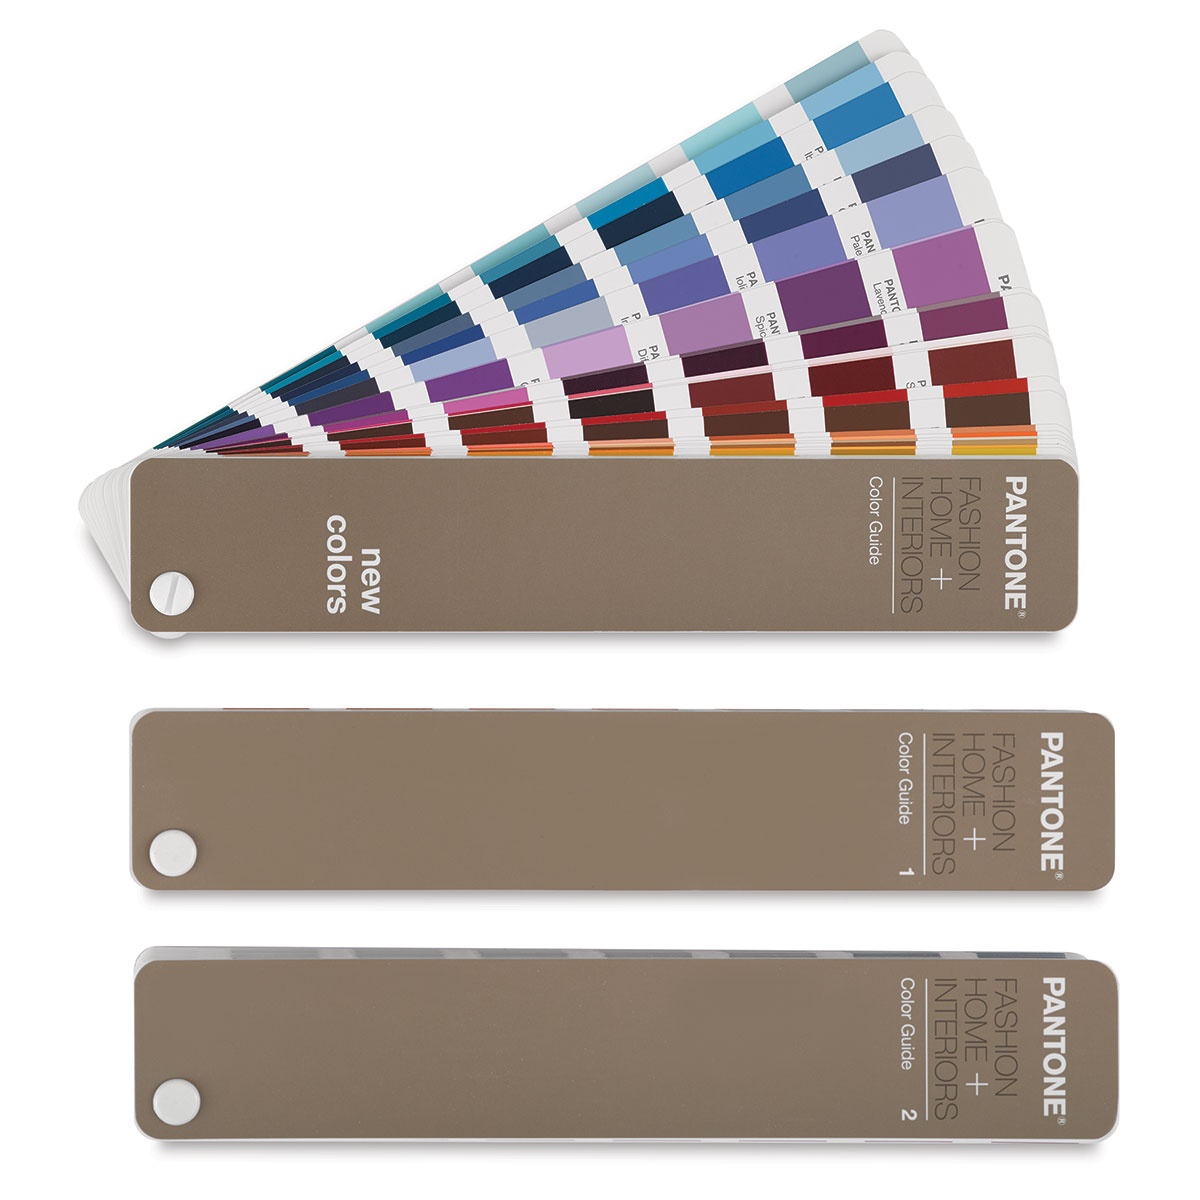 Pantone Fashion Home And Interiors Color Guide Blick Art Materials